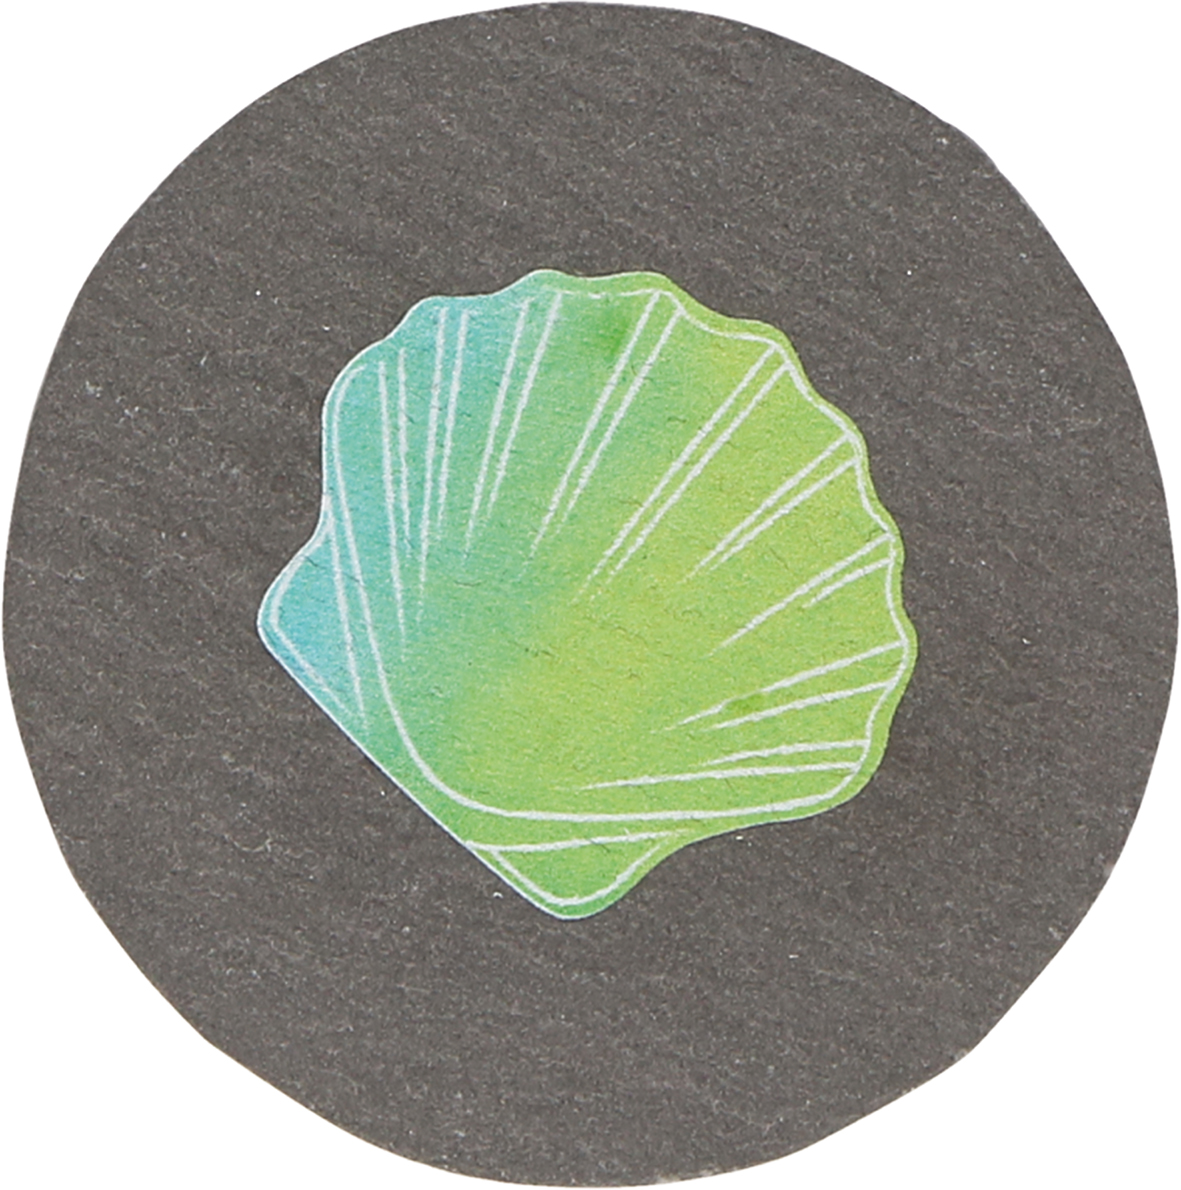 Slate Magnet “Scallop Shell of St. James”